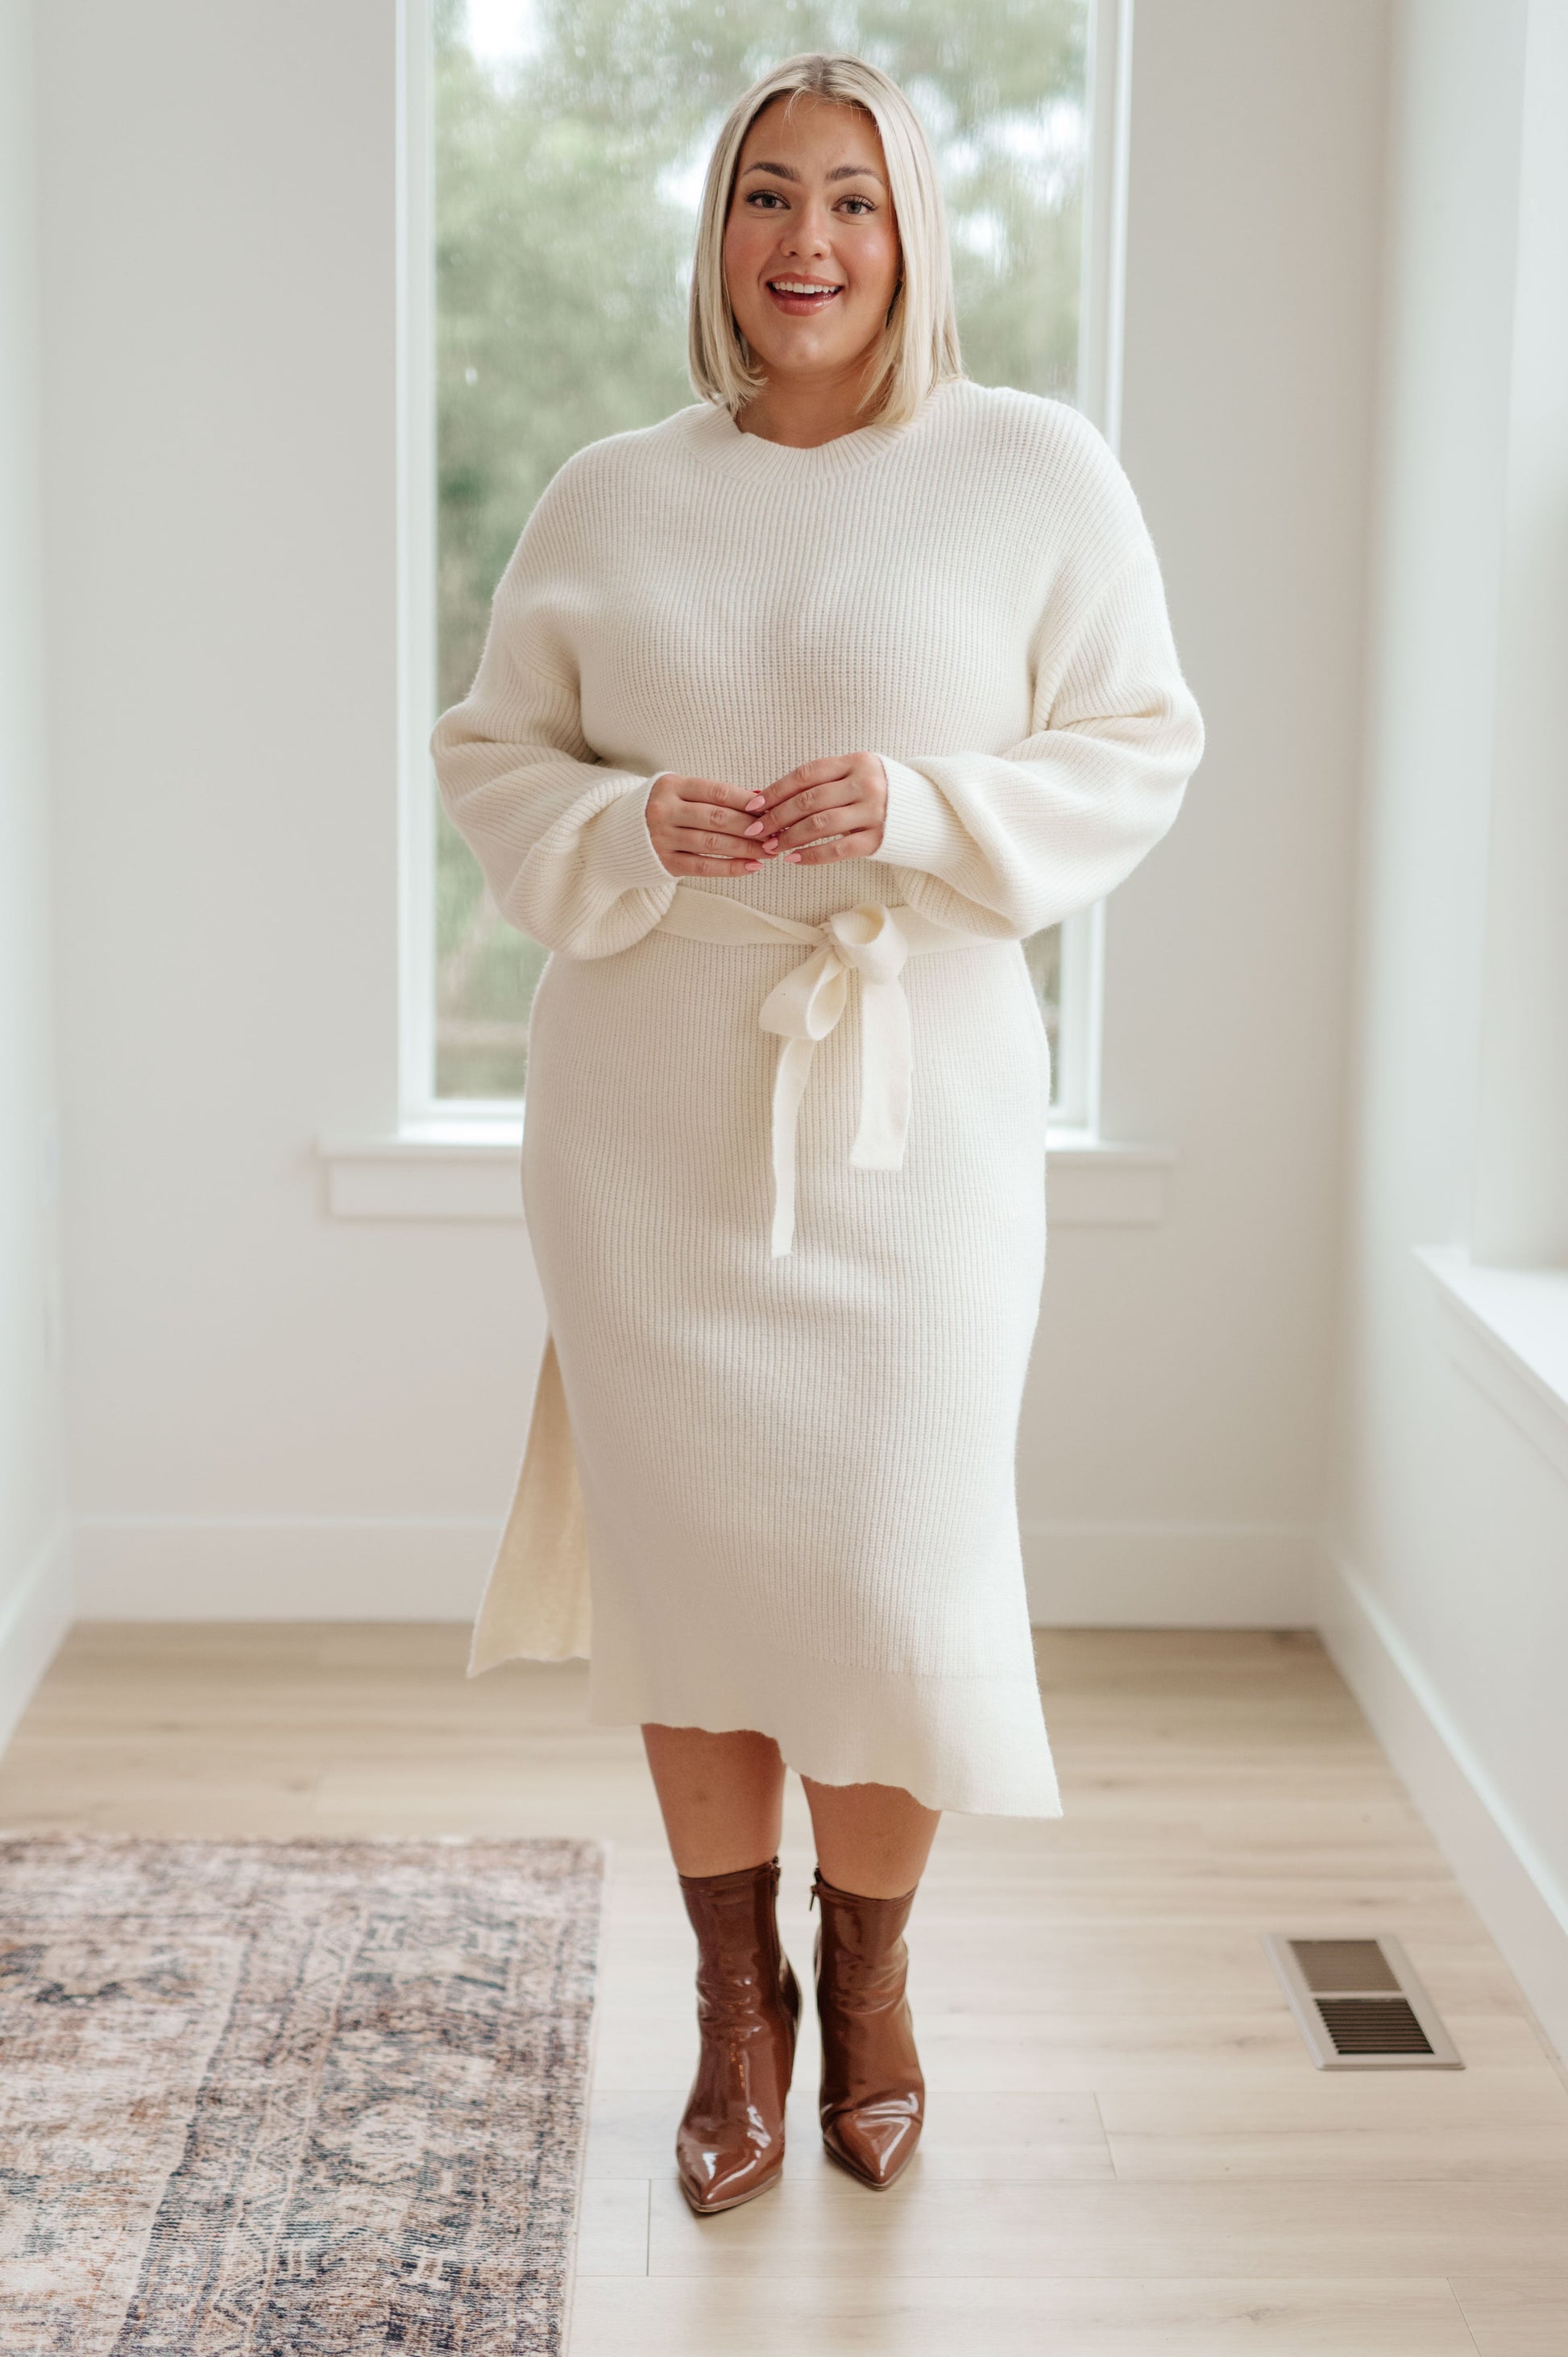 Hello Darling Sweater Dress - Dixie Hike & Style